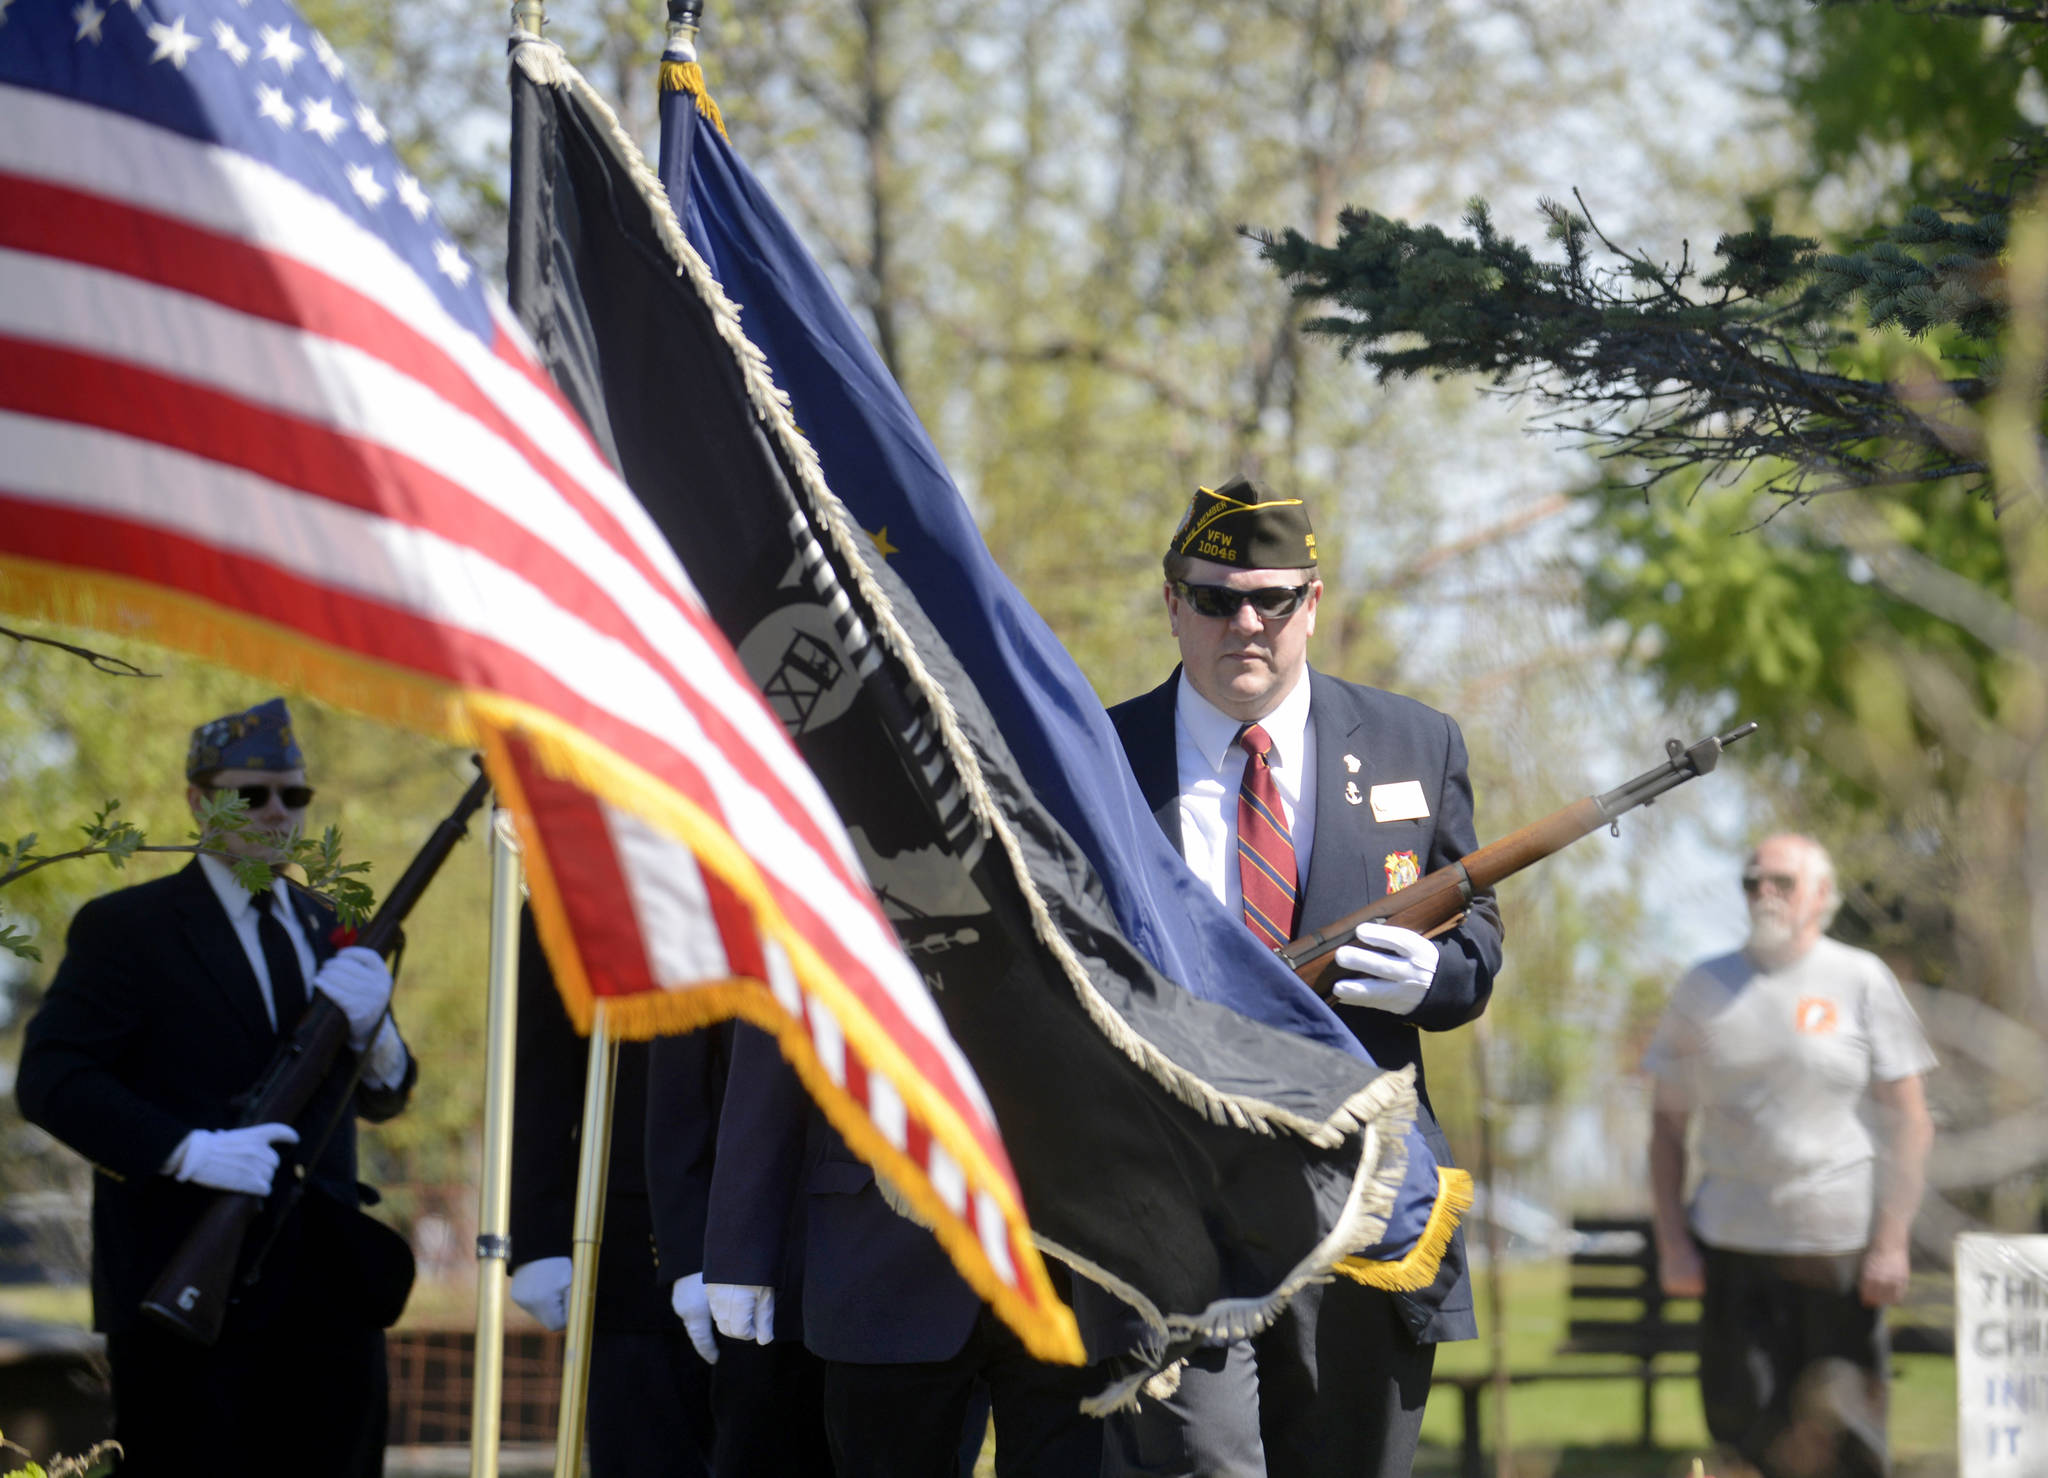 John Walker, Commander of the Veterans of Foreign Wars Soldotna post, leads the color guard in retiring the colors at a Memorial Day ceremony at Leif Hansen Memorial Park on Monday, May 28 in Kenai, Alaska. (Ben Boettger/Peninsula Clarion)